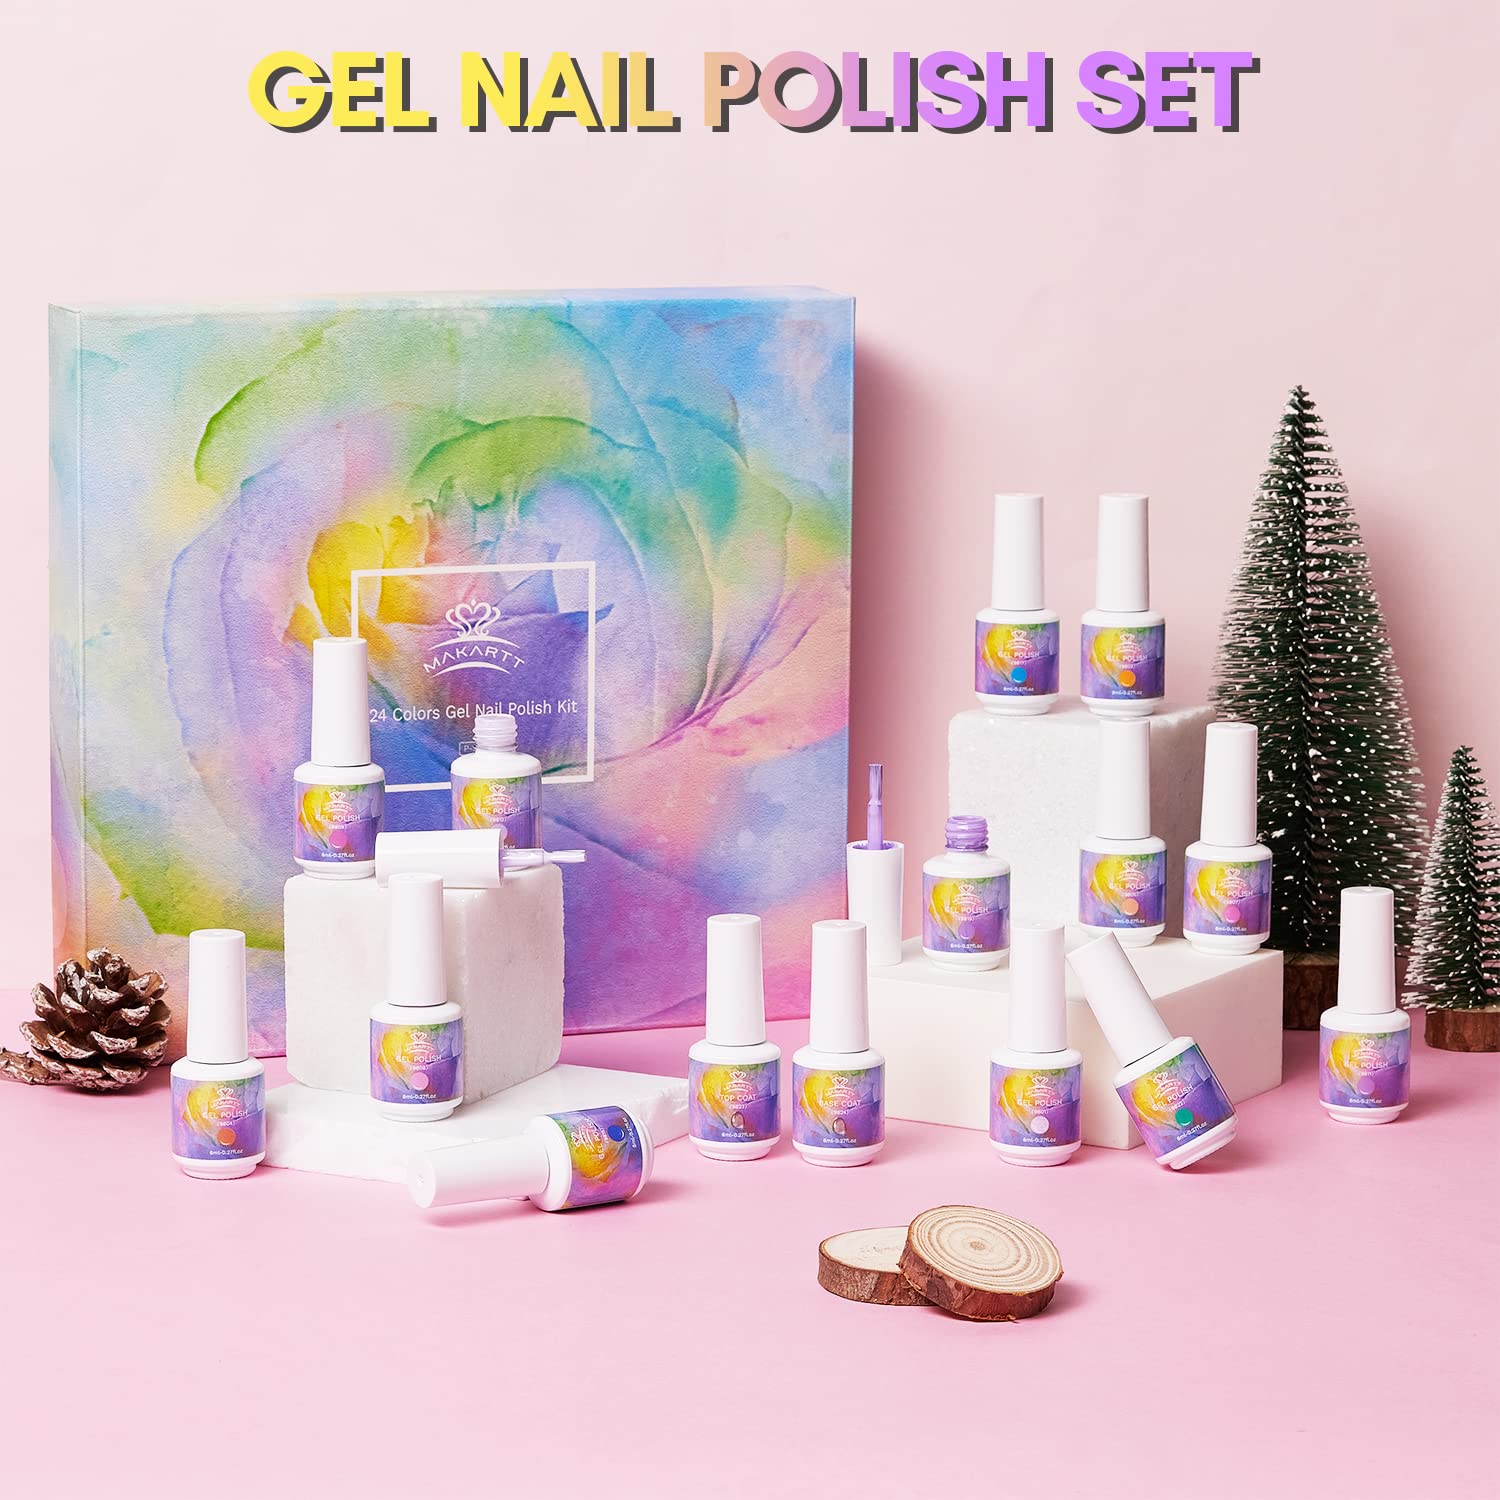 Mermaid Collections Gel Nail Polish with Base and Top Coat, 22 Colors Gel Polish Set (8ml/Each)